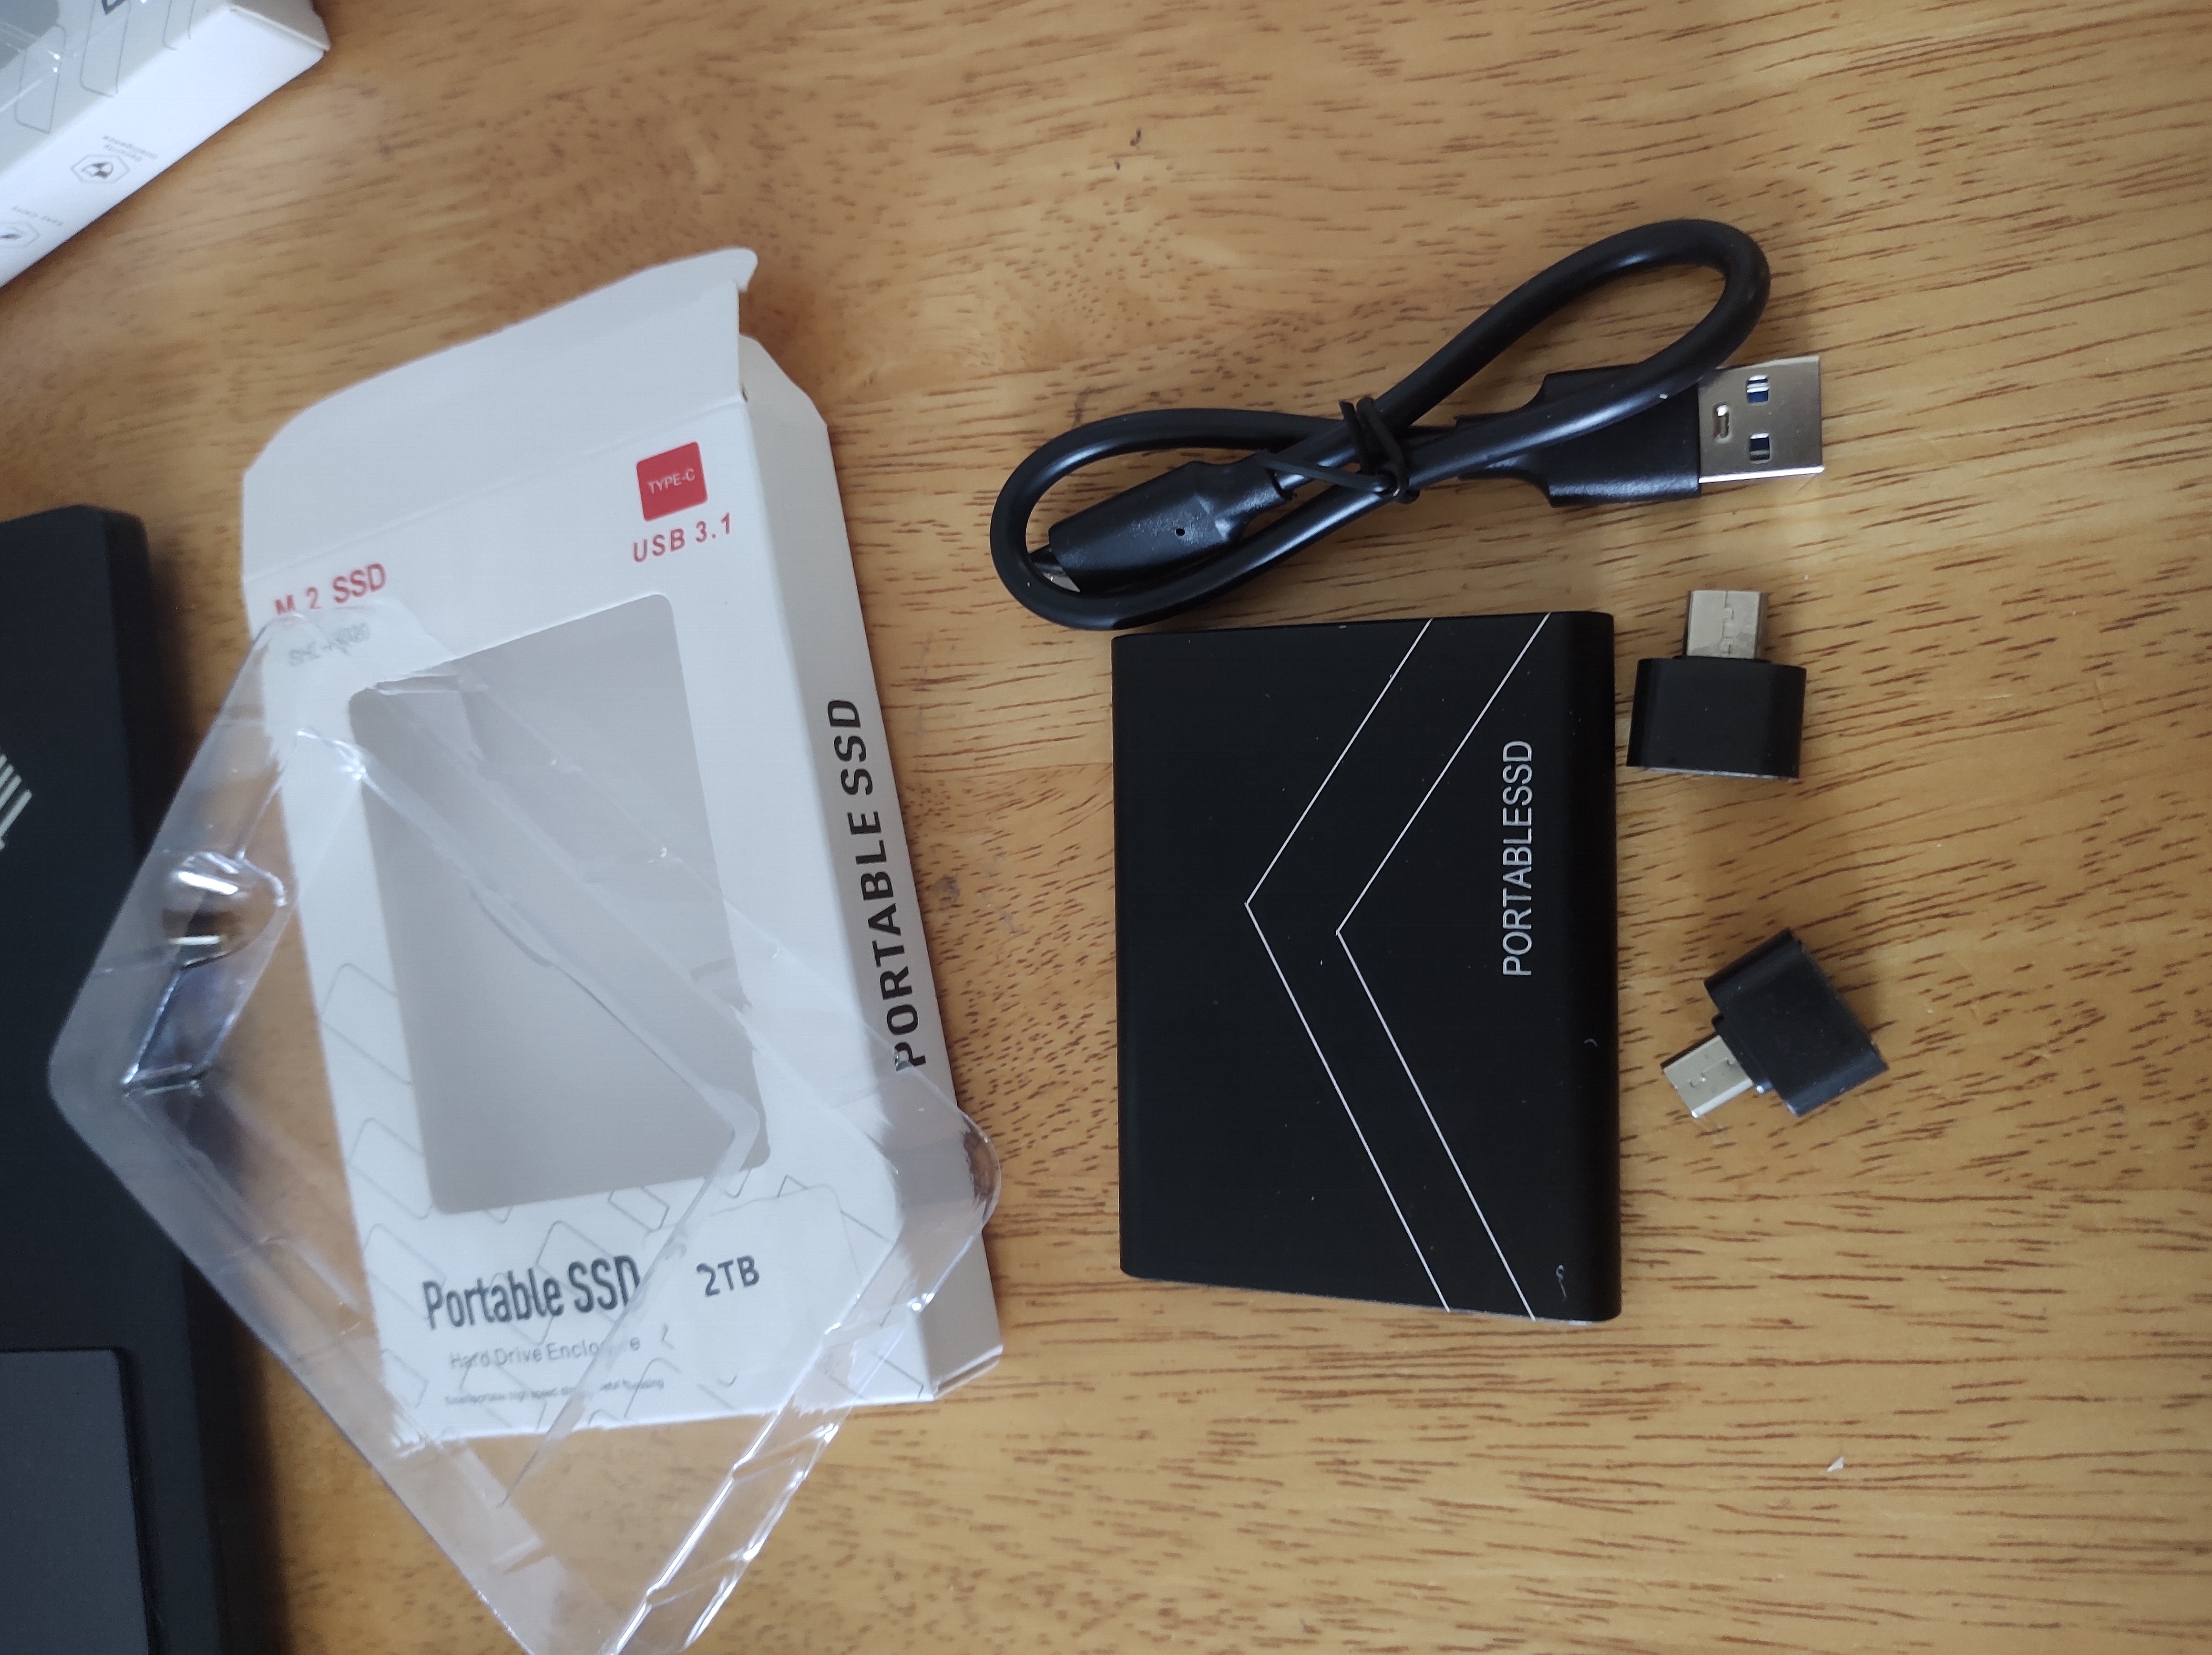 Contents of the Box: external drive, USB cable and adaptors  